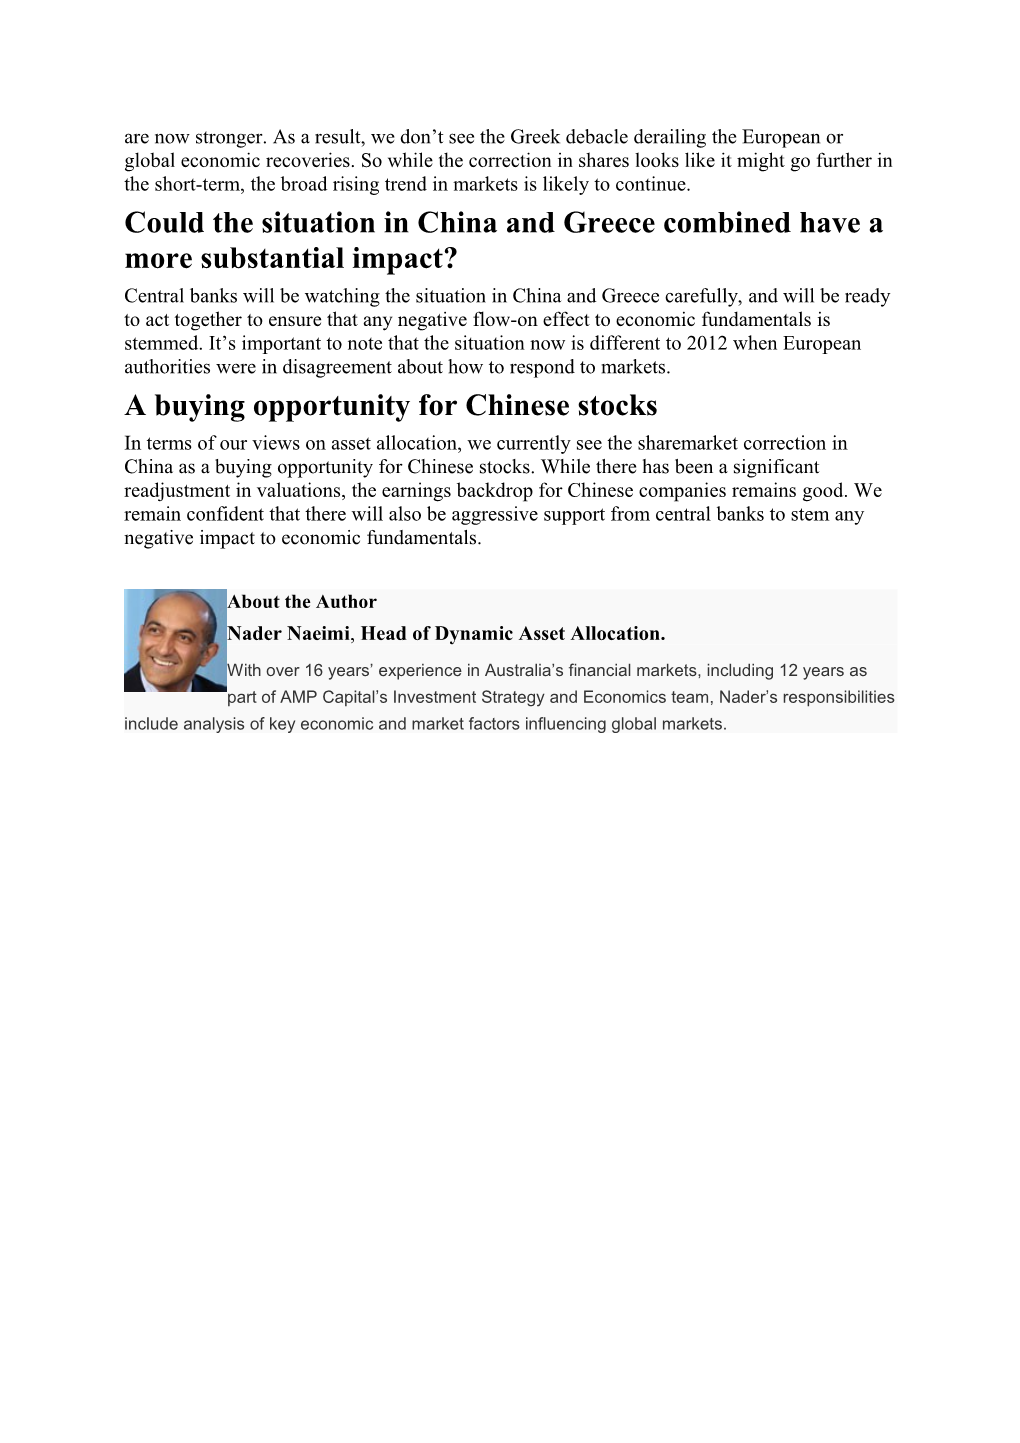 China Stocks in Trading Halt What to Consider?